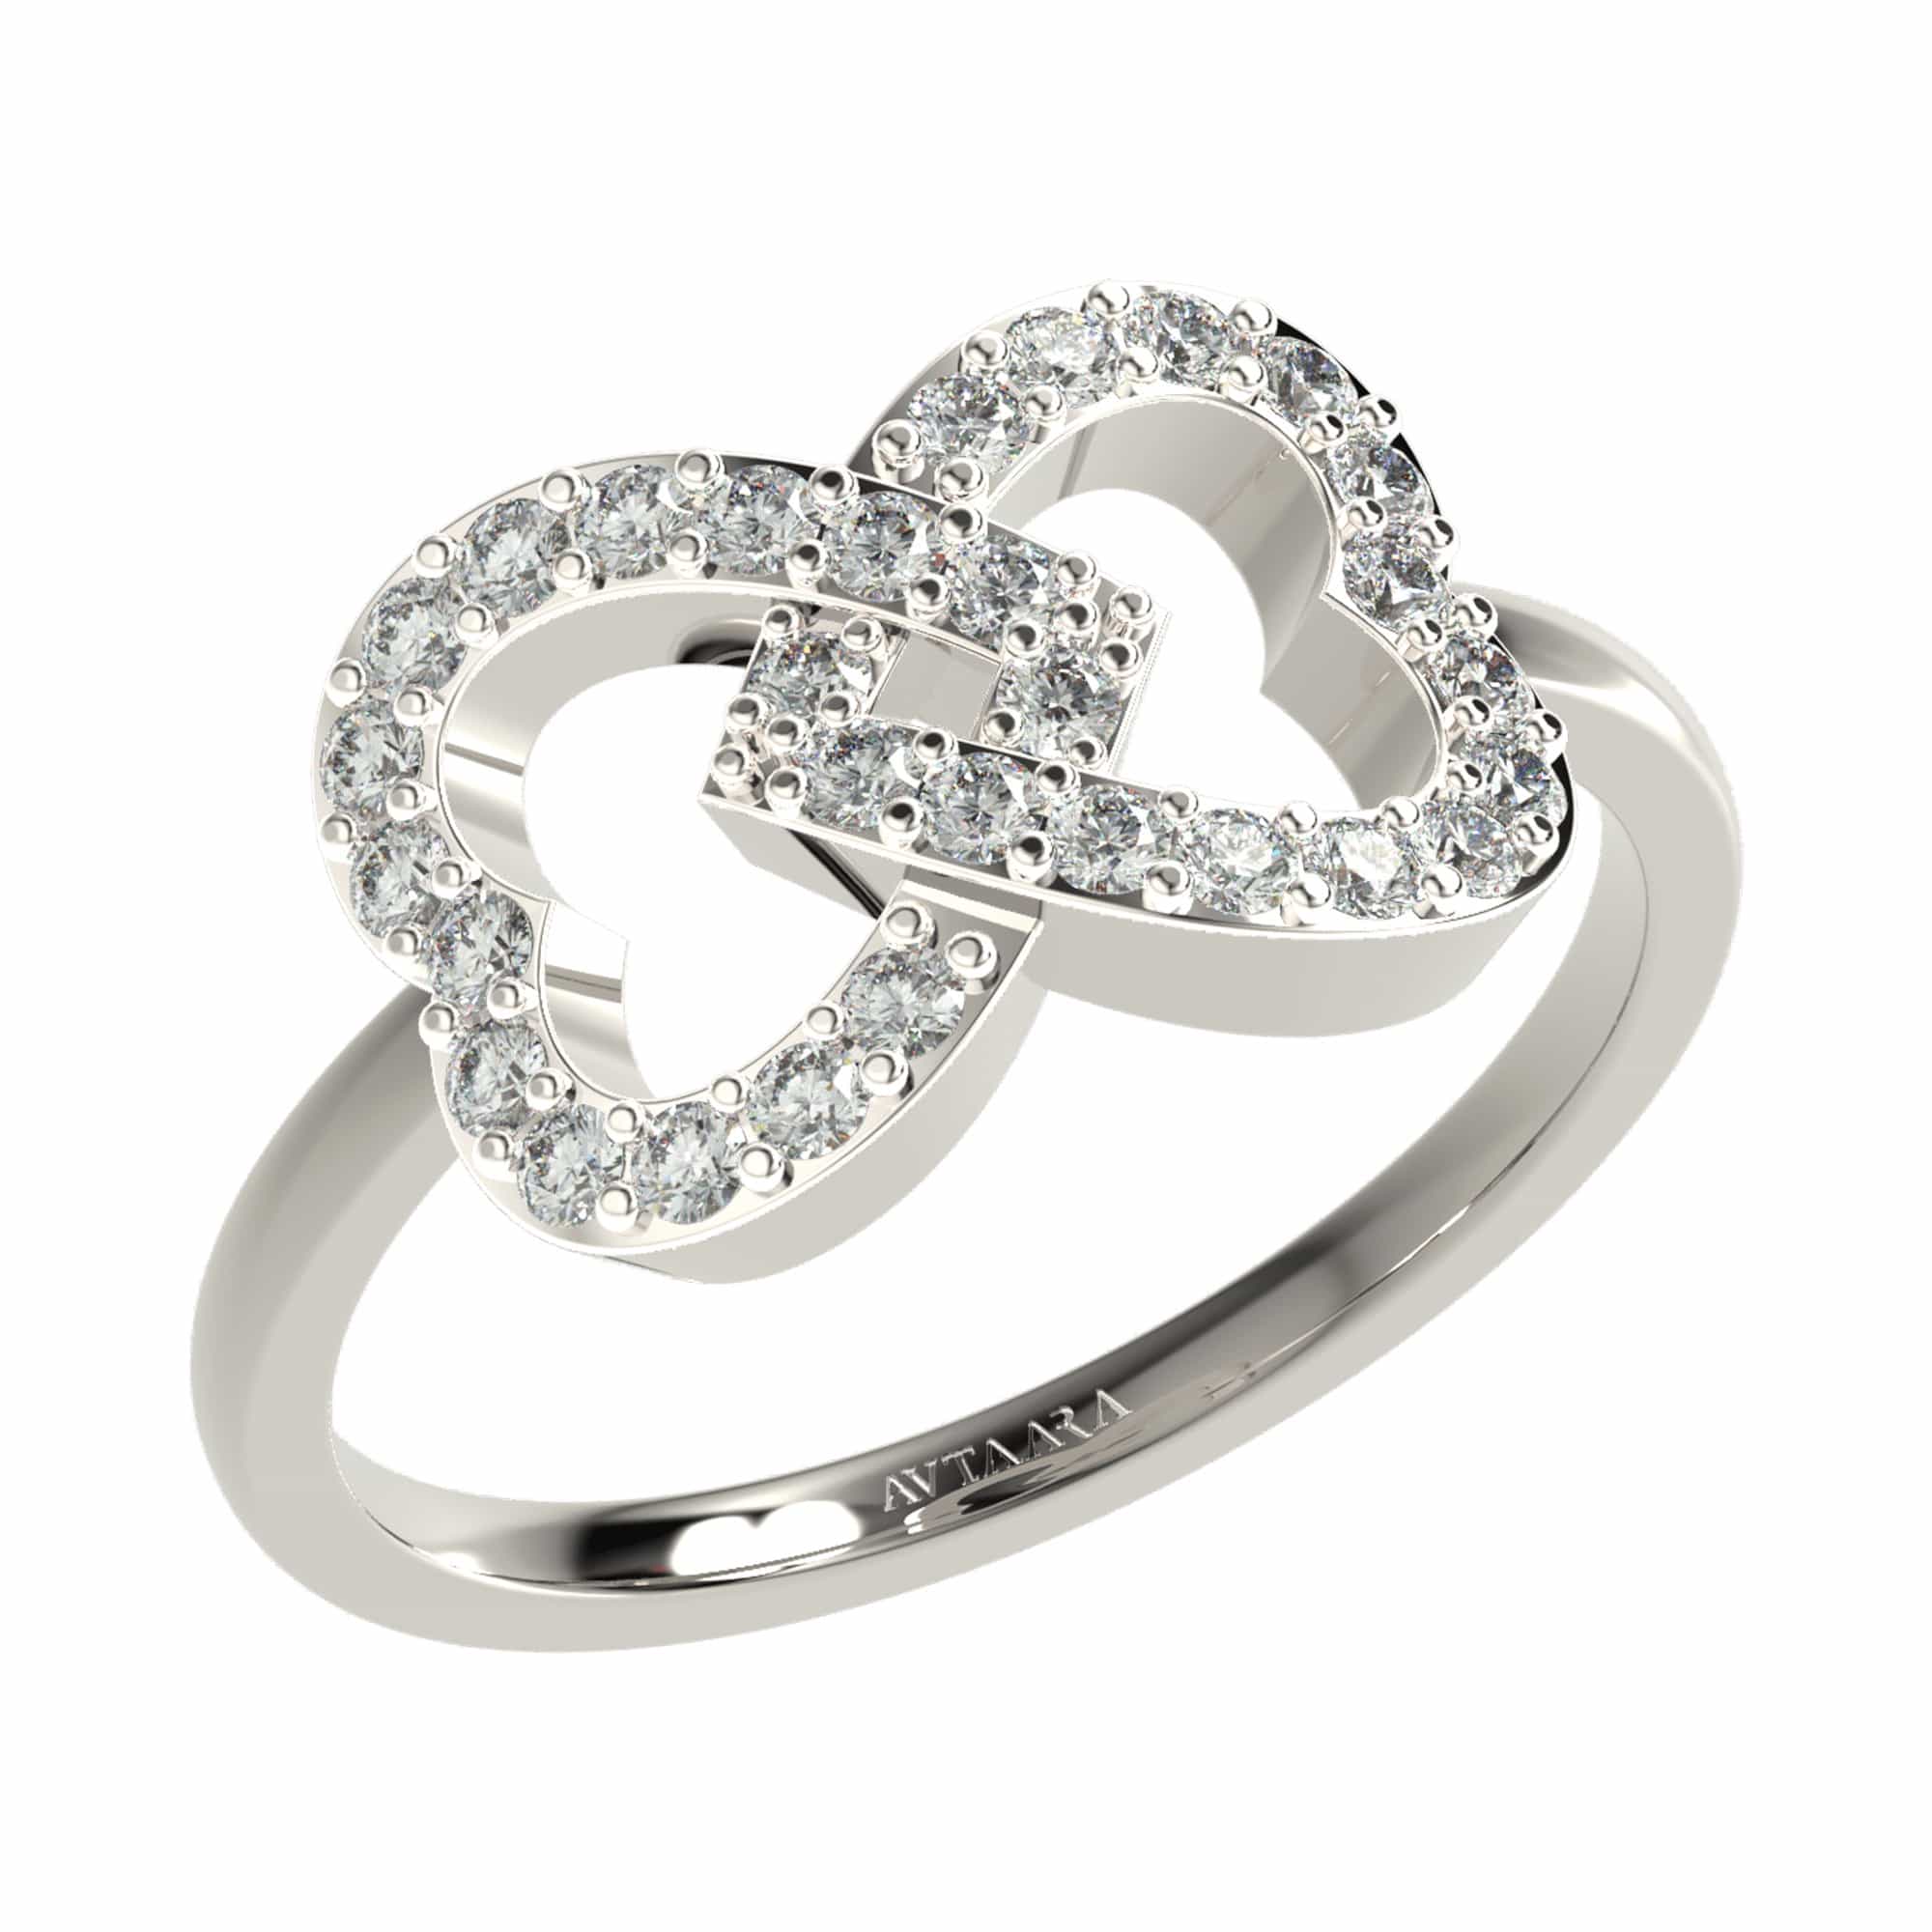 Entwined Love Ring